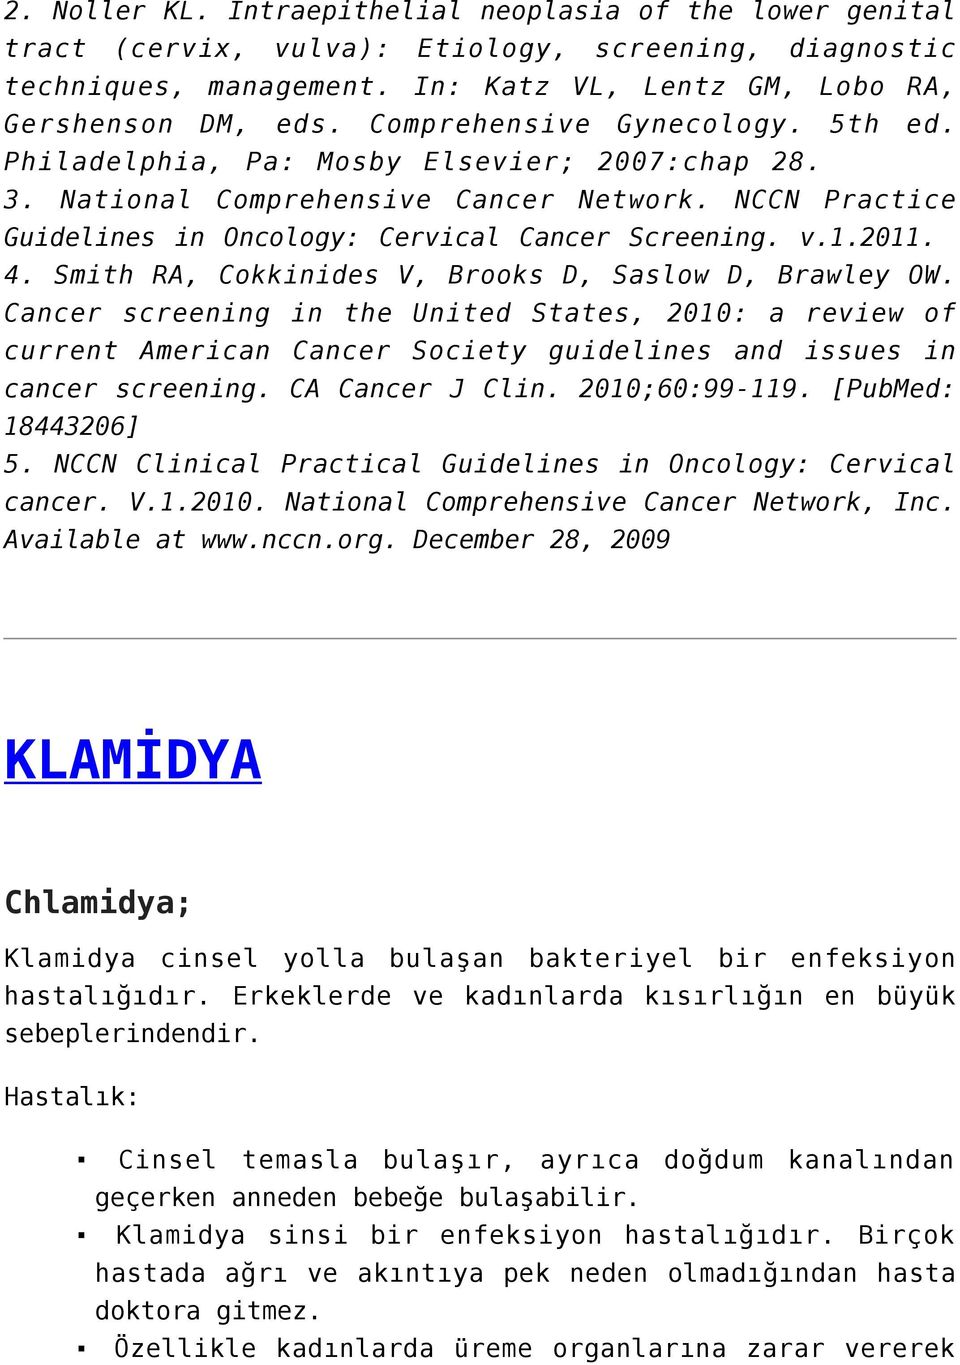 4. Smith RA, Cokkinides V, Brooks D, Saslow D, Brawley OW. Cancer screening in the United States, 2010: a review of current American Cancer Society guidelines and issues in cancer screening.